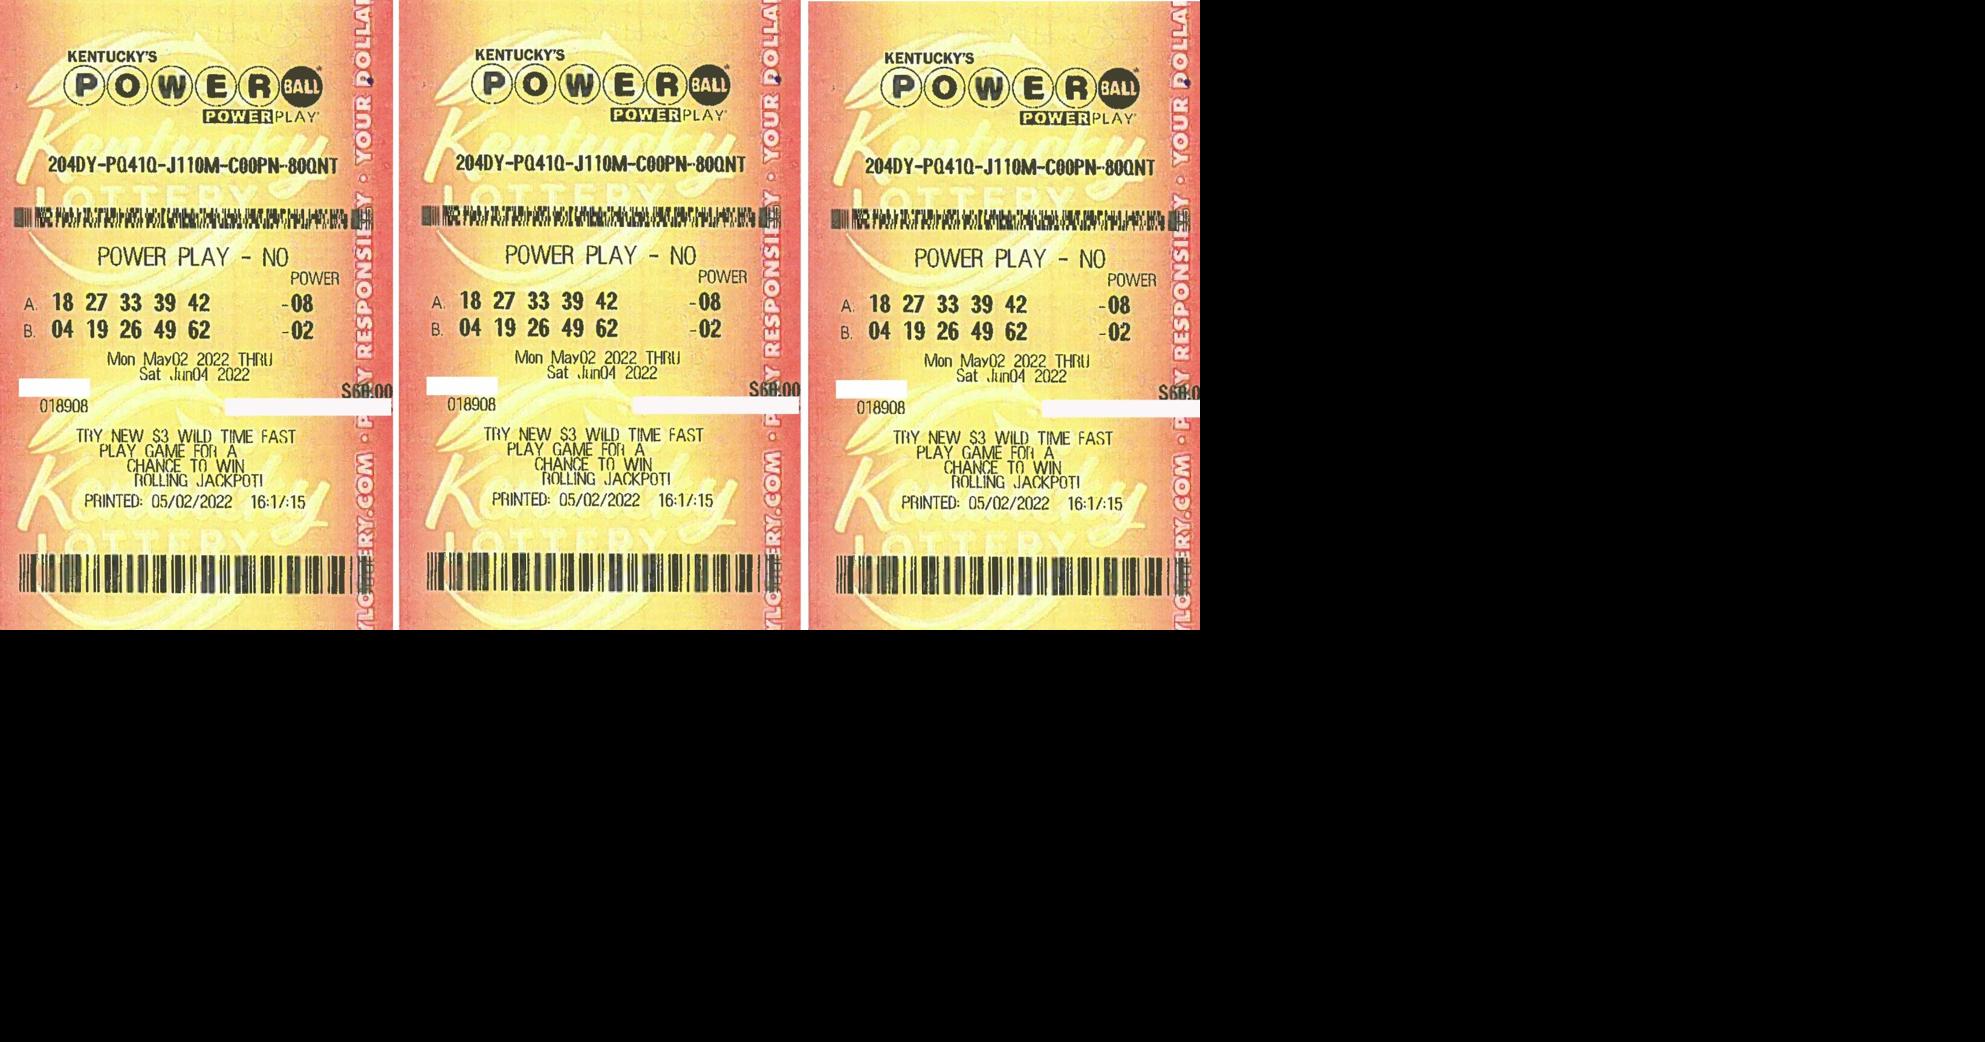 $50,000 Powerball ticket purchased by 17 coworkers in Kentucky